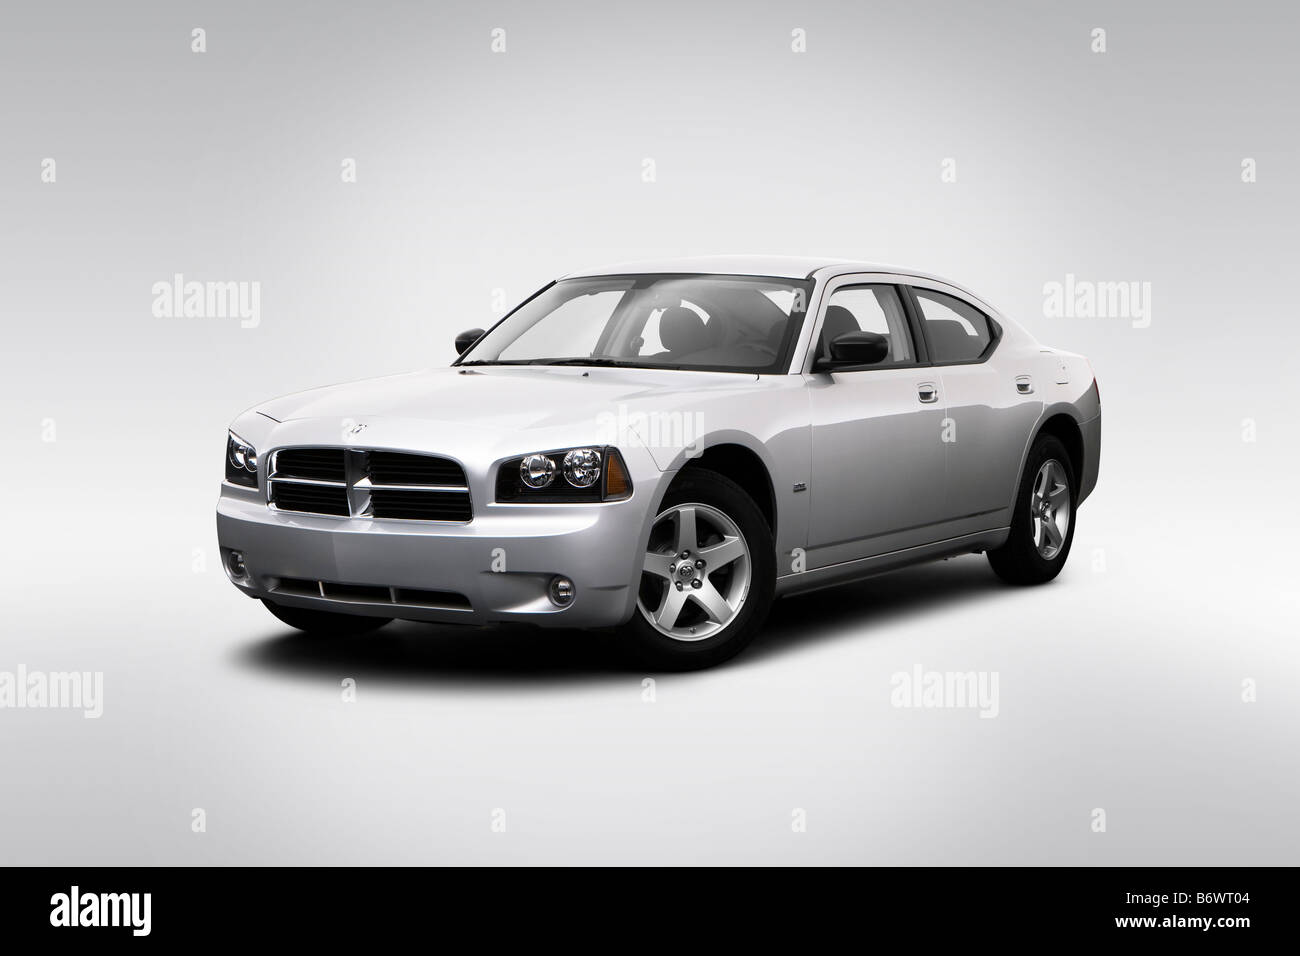 2009 Dodge Charger SXT in Silver - Front angle view Stock Photo - Alamy